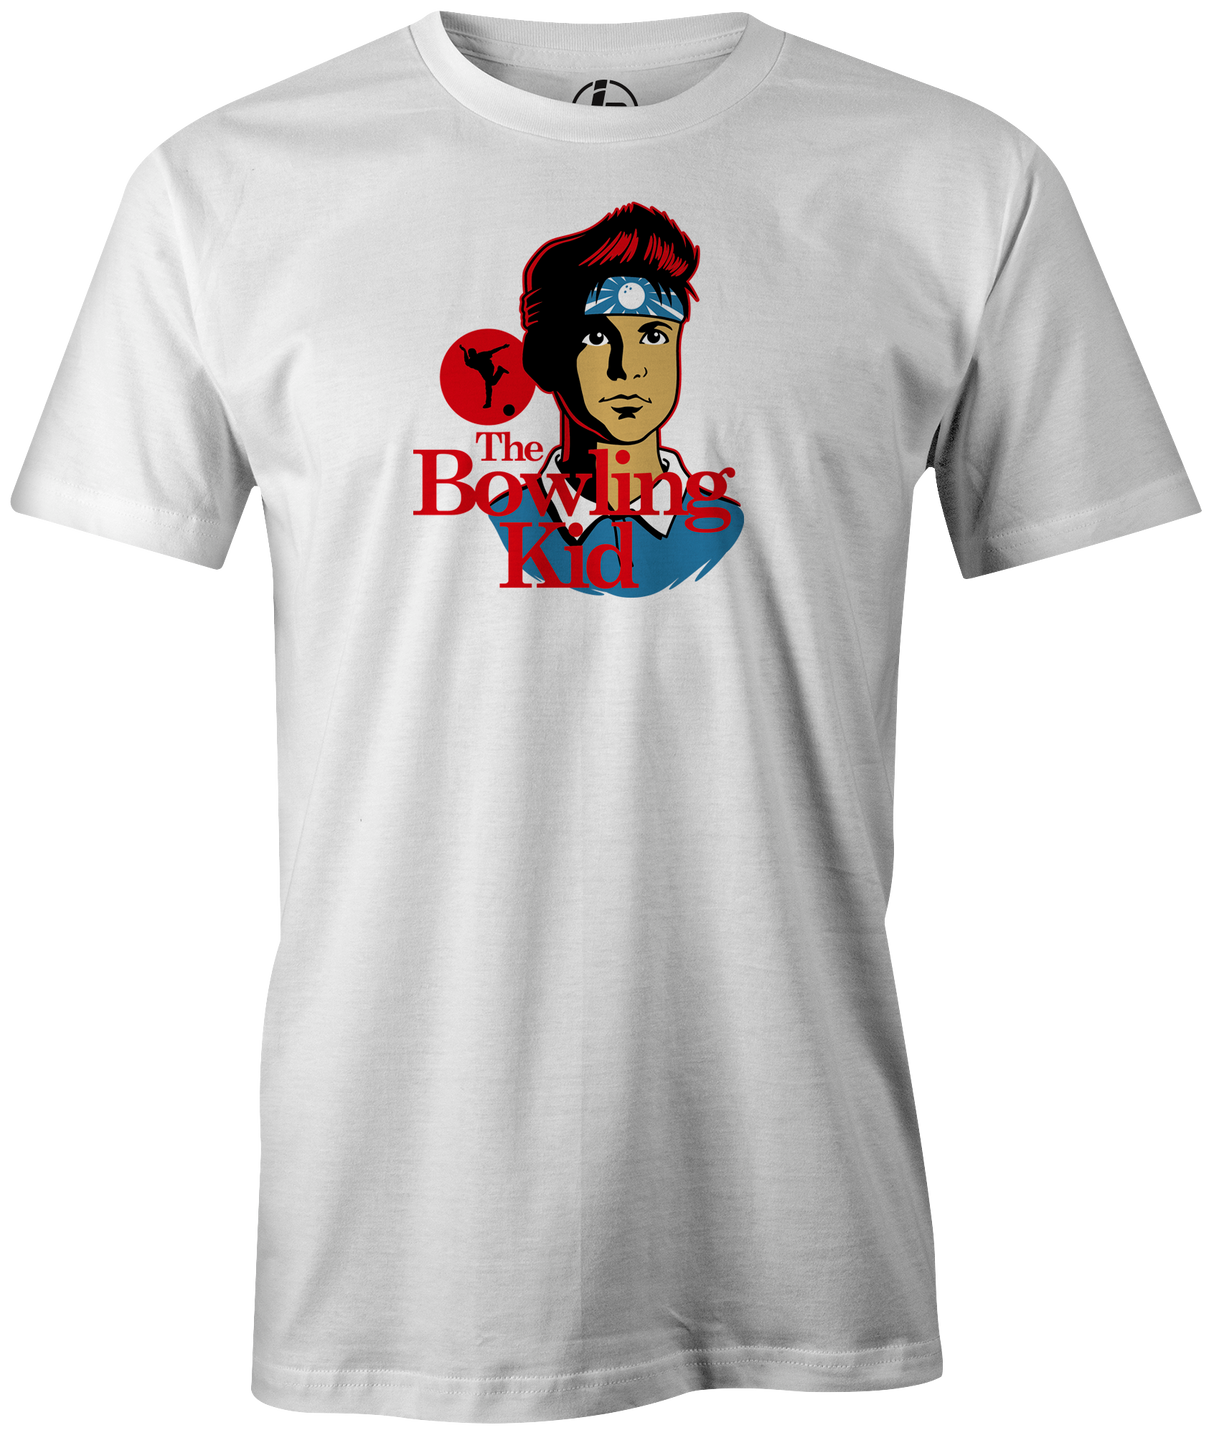 The Bowling Kid Men's bowling shirt, white, tee, tee-shirt, tees, t-shirt, cool, the karate kid, movies and television, pop culture, vintage, league bowling team shirt, free shipping, discount, cheap, coupon, merch, apparel.